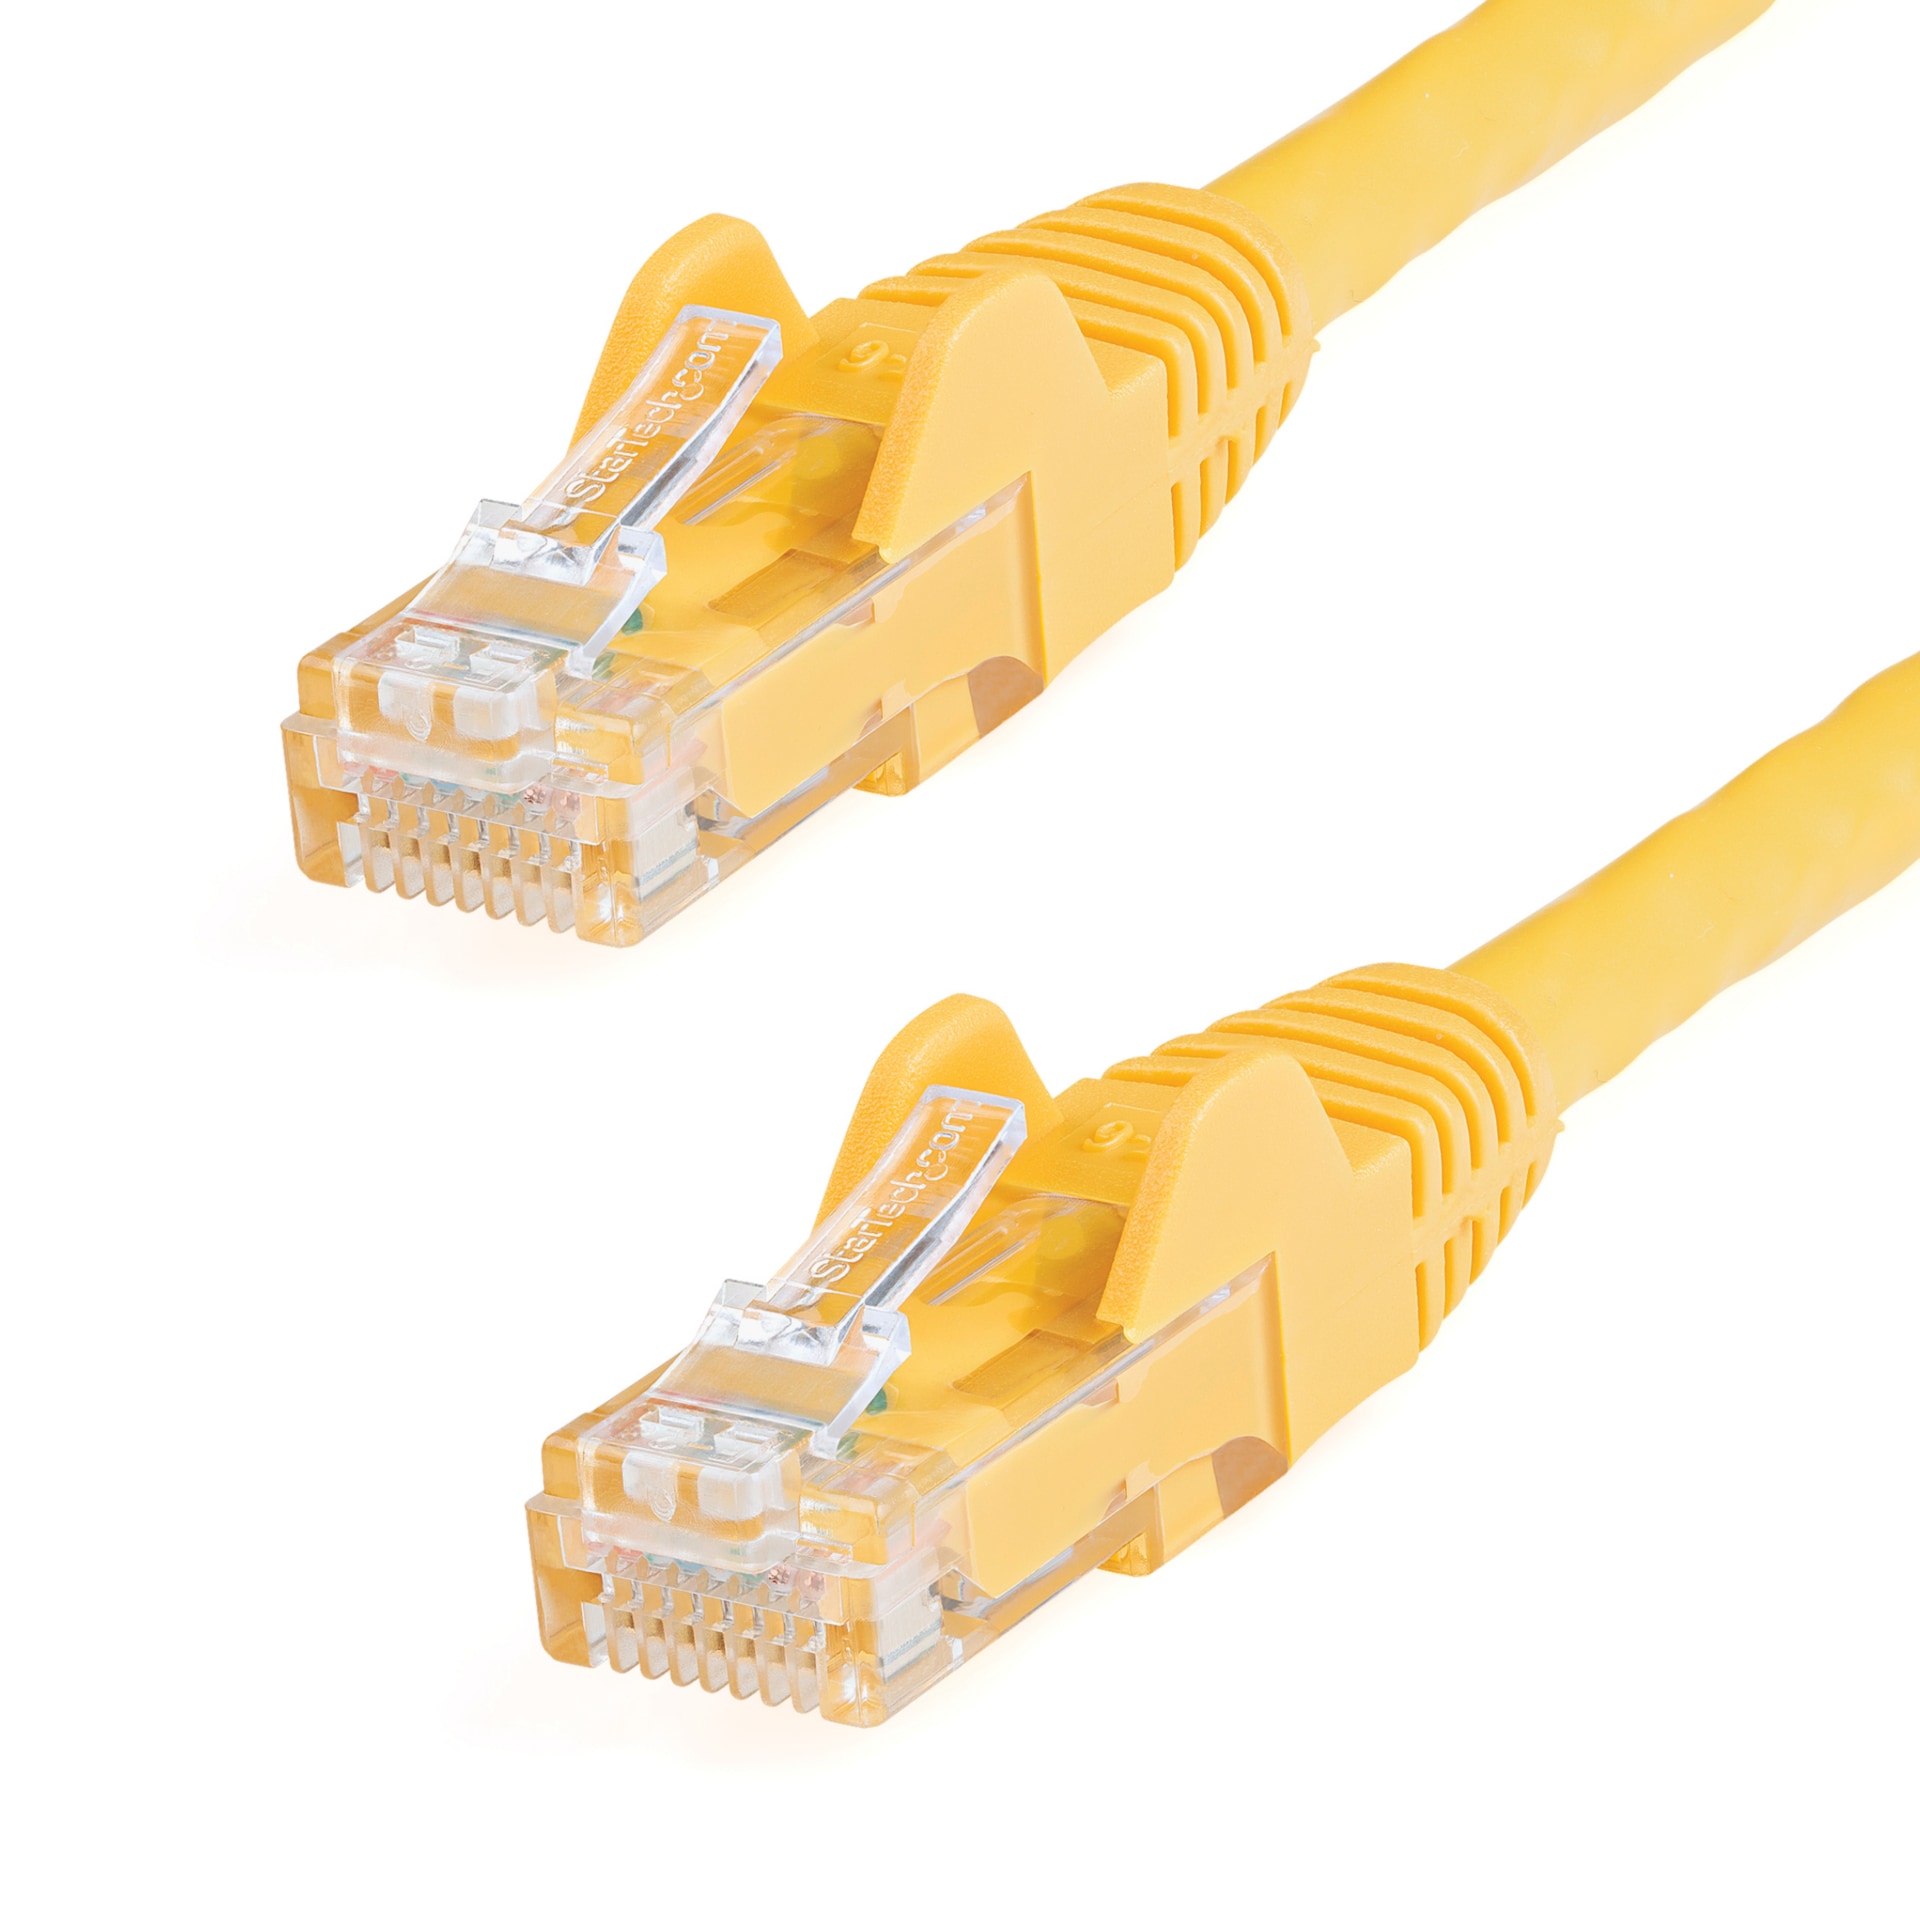 StarTech.com 5ft CAT6 Ethernet Cable Yellow Snagless UTP CAT 6 Gigabit Cord/Wire 100W PoE 650MHz